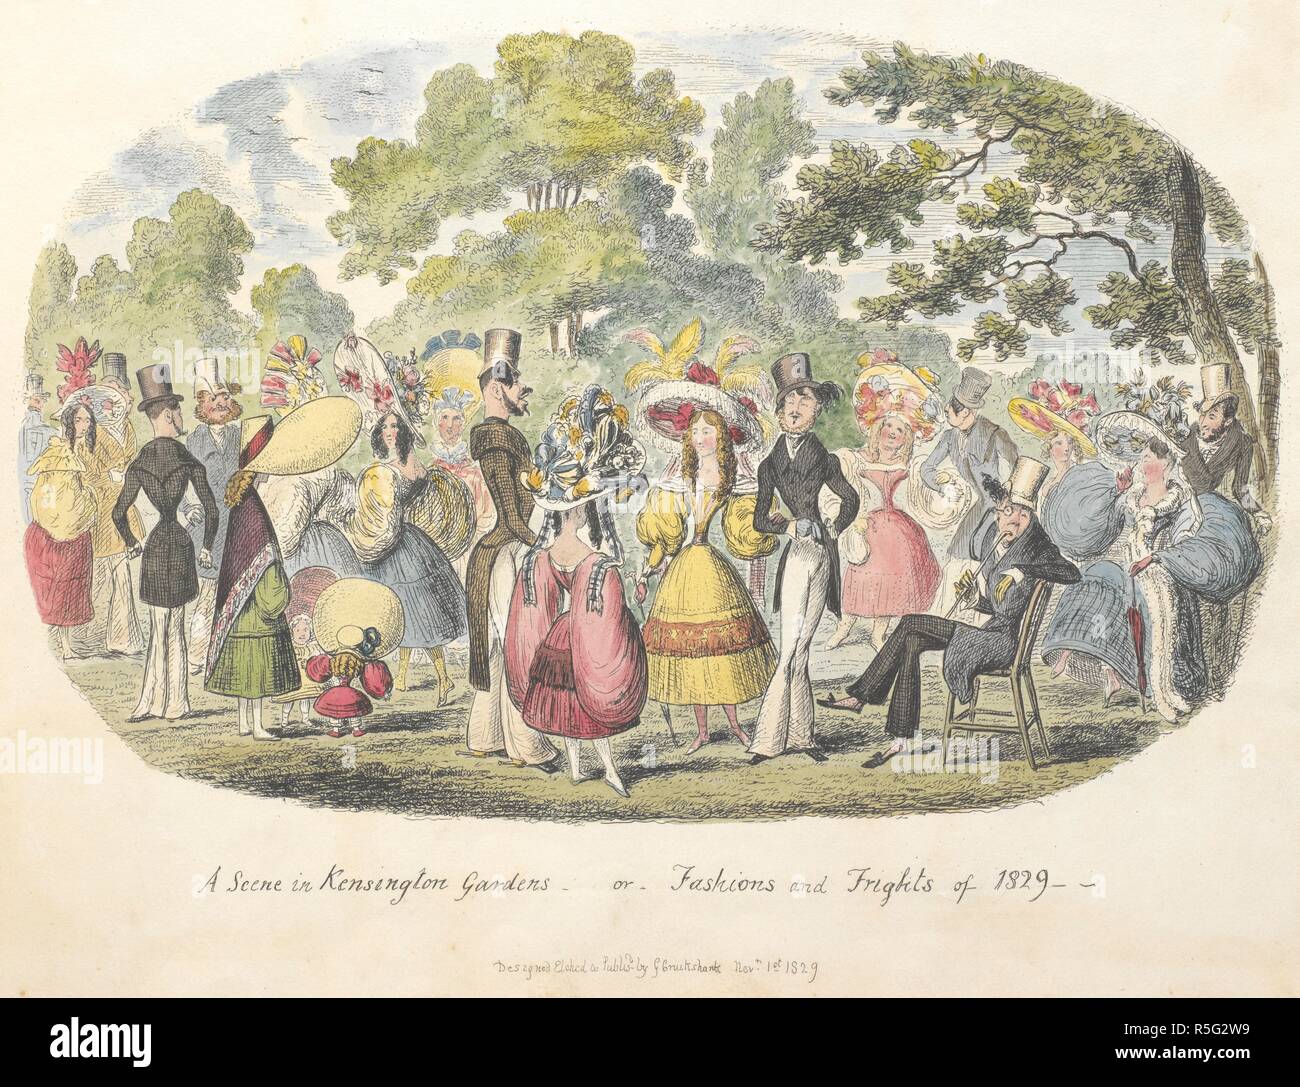 'A scene in Kensington Gardens, or fashion and frights of 1829'. An amusing sketch showing people dressed up, in the park. Scraps and sketches, etc. London: the Artist, 1828, [29]. Source: LR.410.pp.24 f.8. Author: CRUIKSHANK, GEORGE. Stock Photo